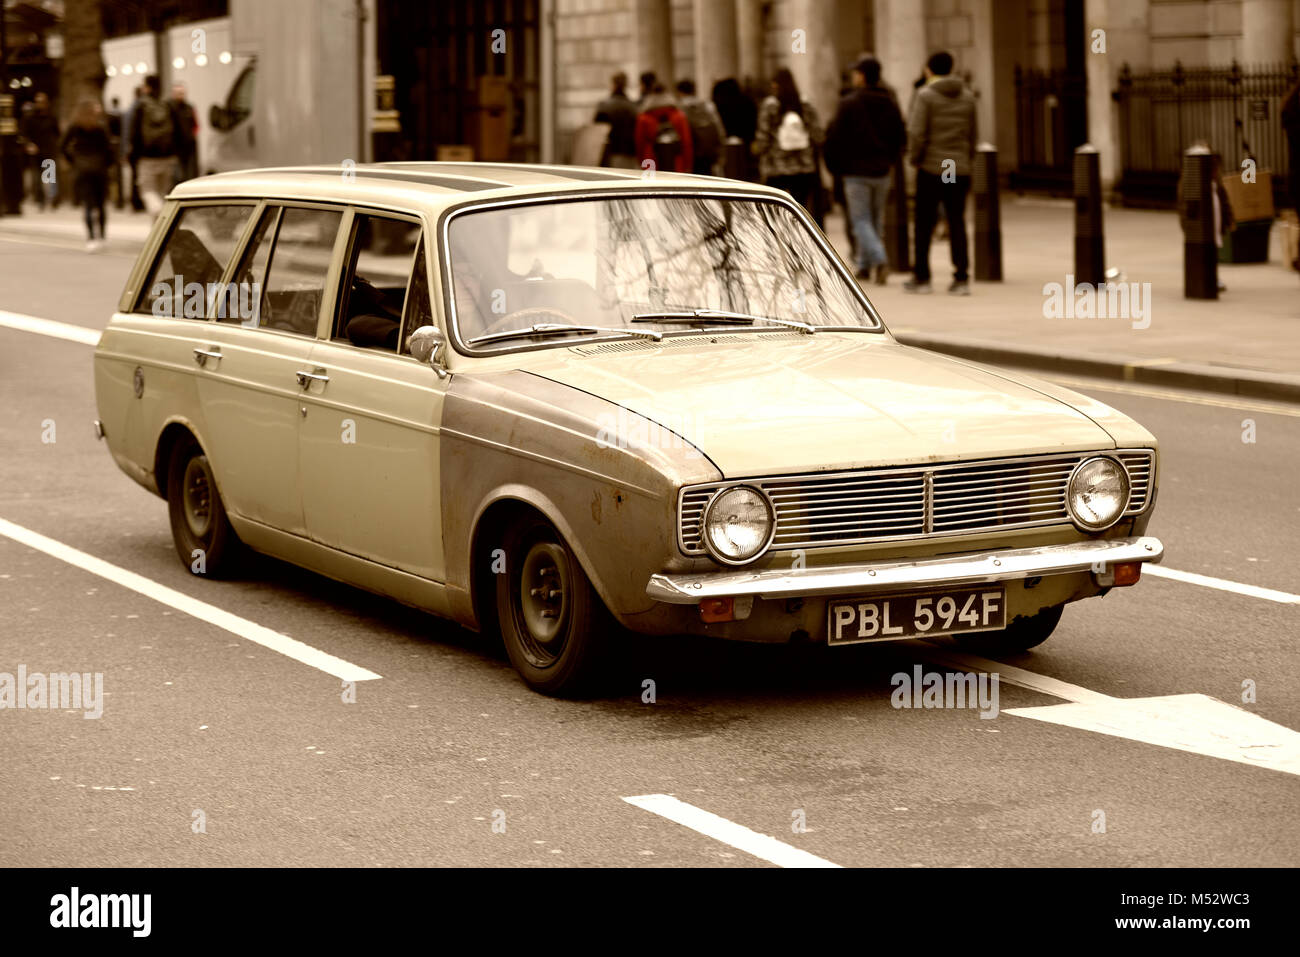 1968 Hillman Minx estate car. Processed to give an aged look. Driving in London, UK Stock Photo